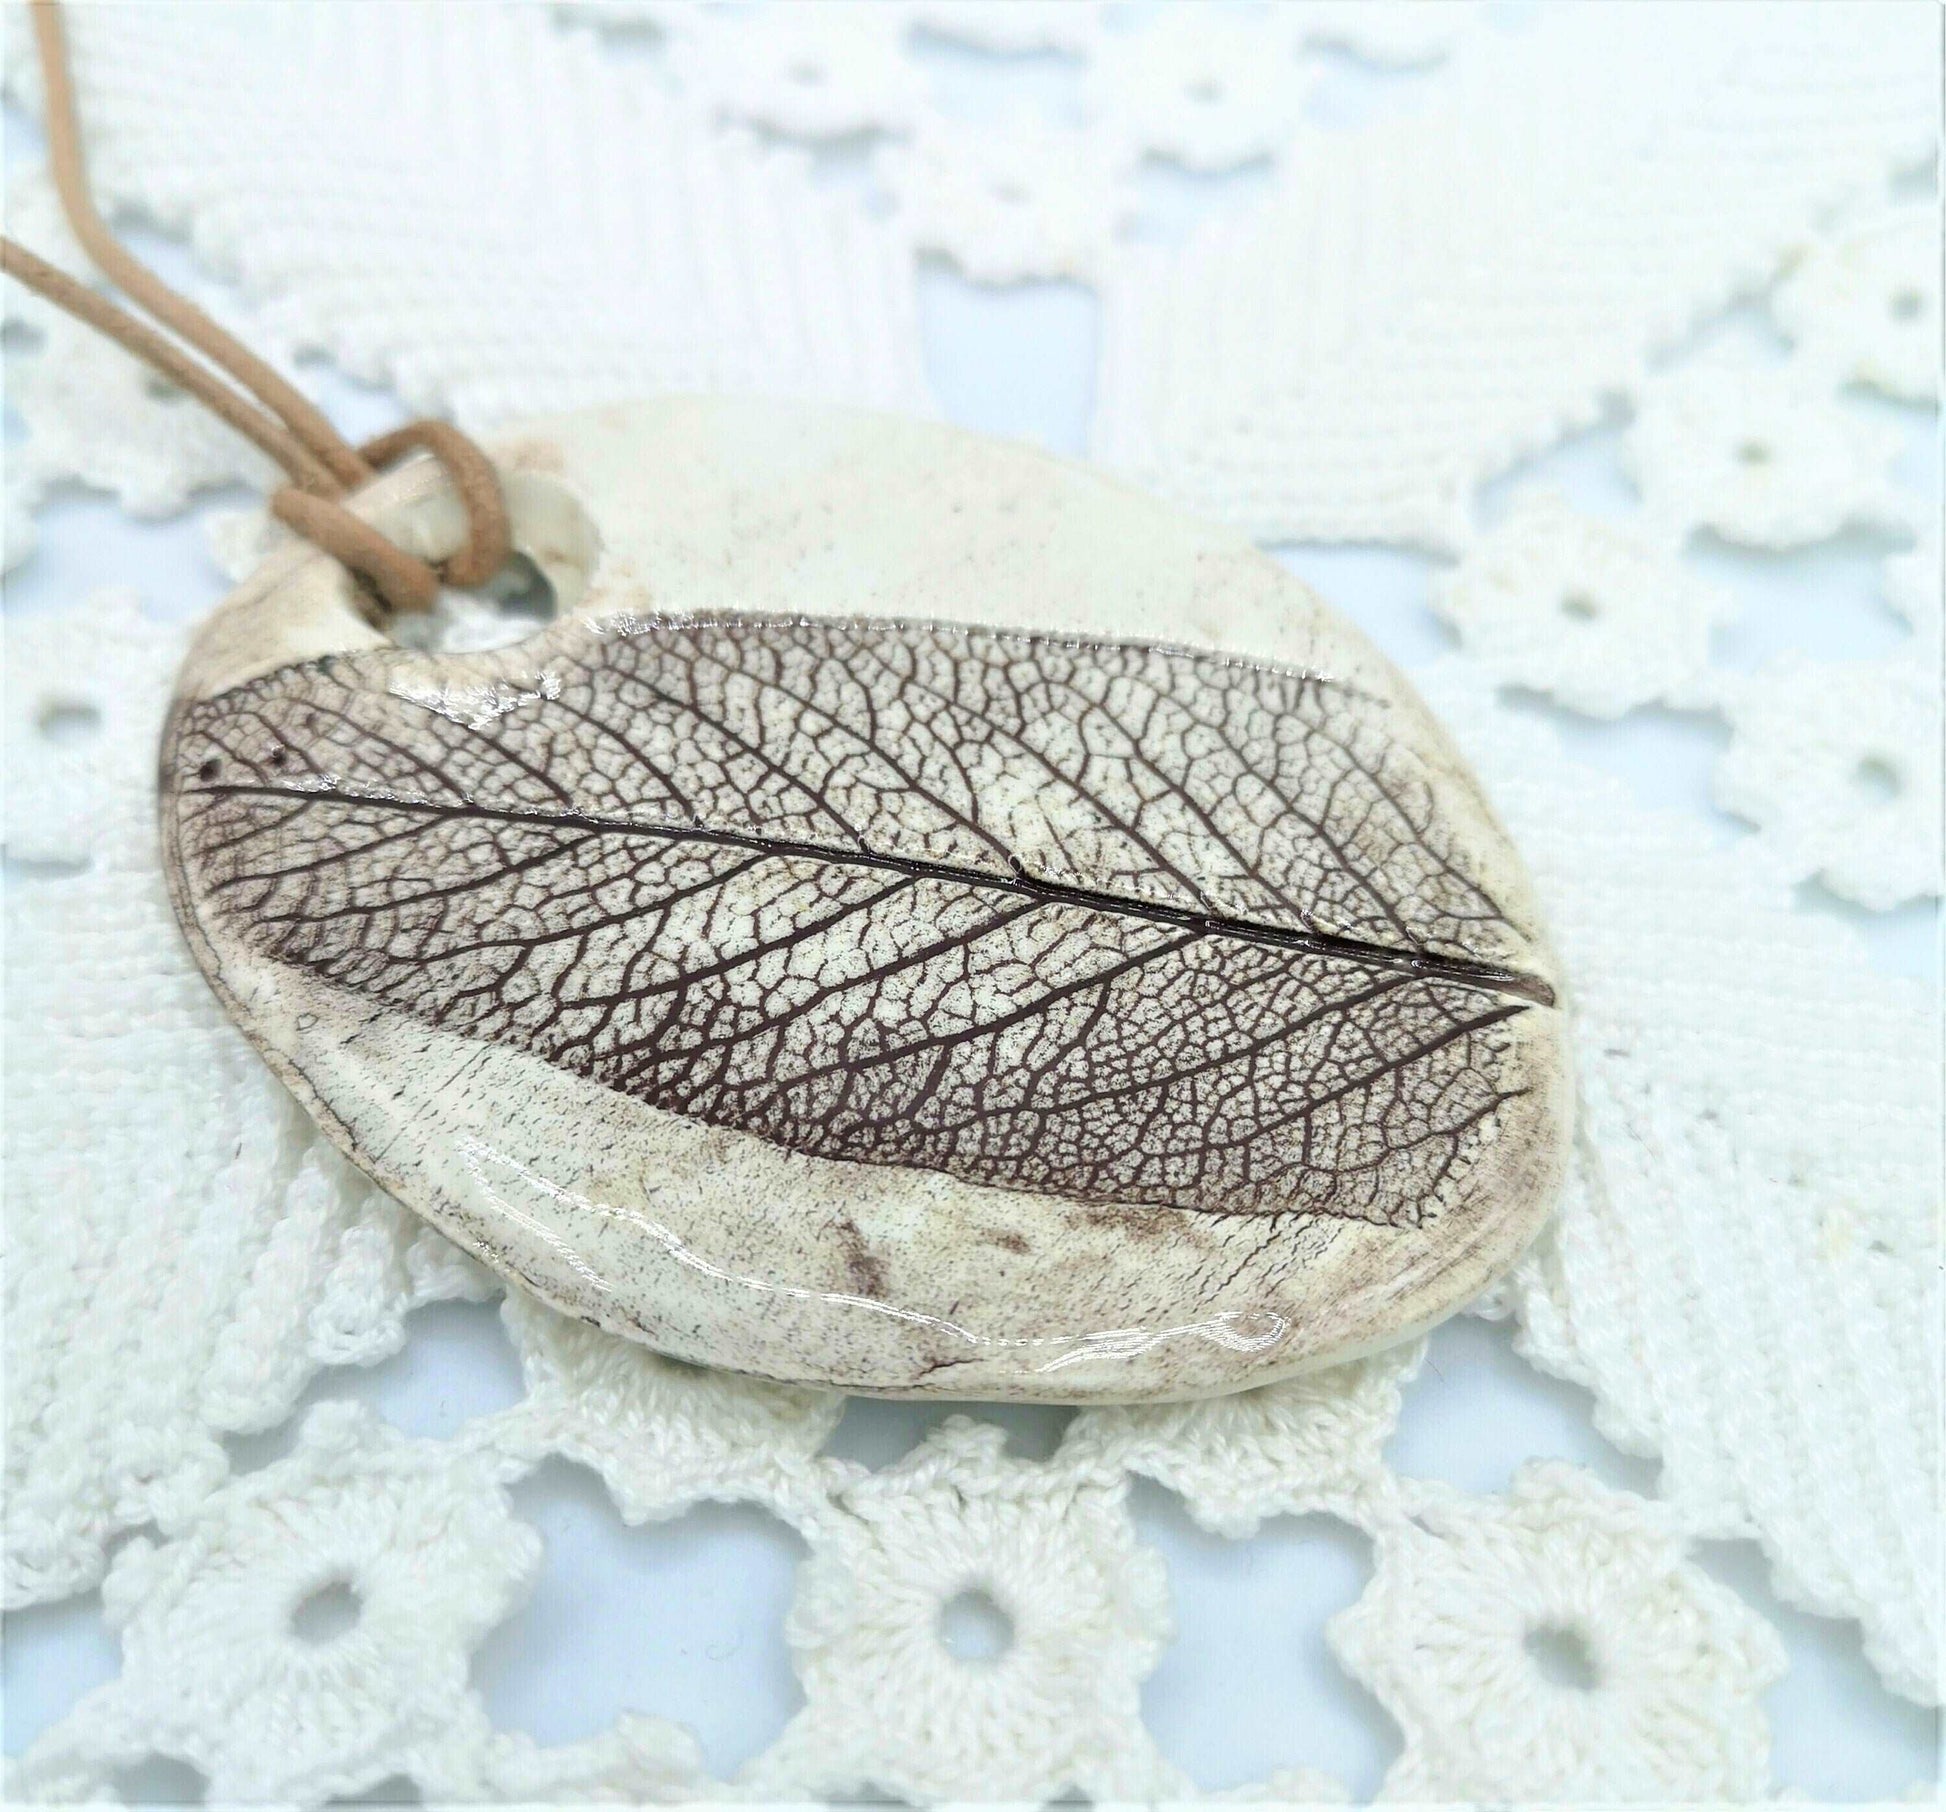 1Pc 85mm Extra Large Handmade Ceramic Necklace Pendant for Jewelry Making, Rustic Pressed Sage Leavf Jumbo Clay Charm For Eclectic Fashion